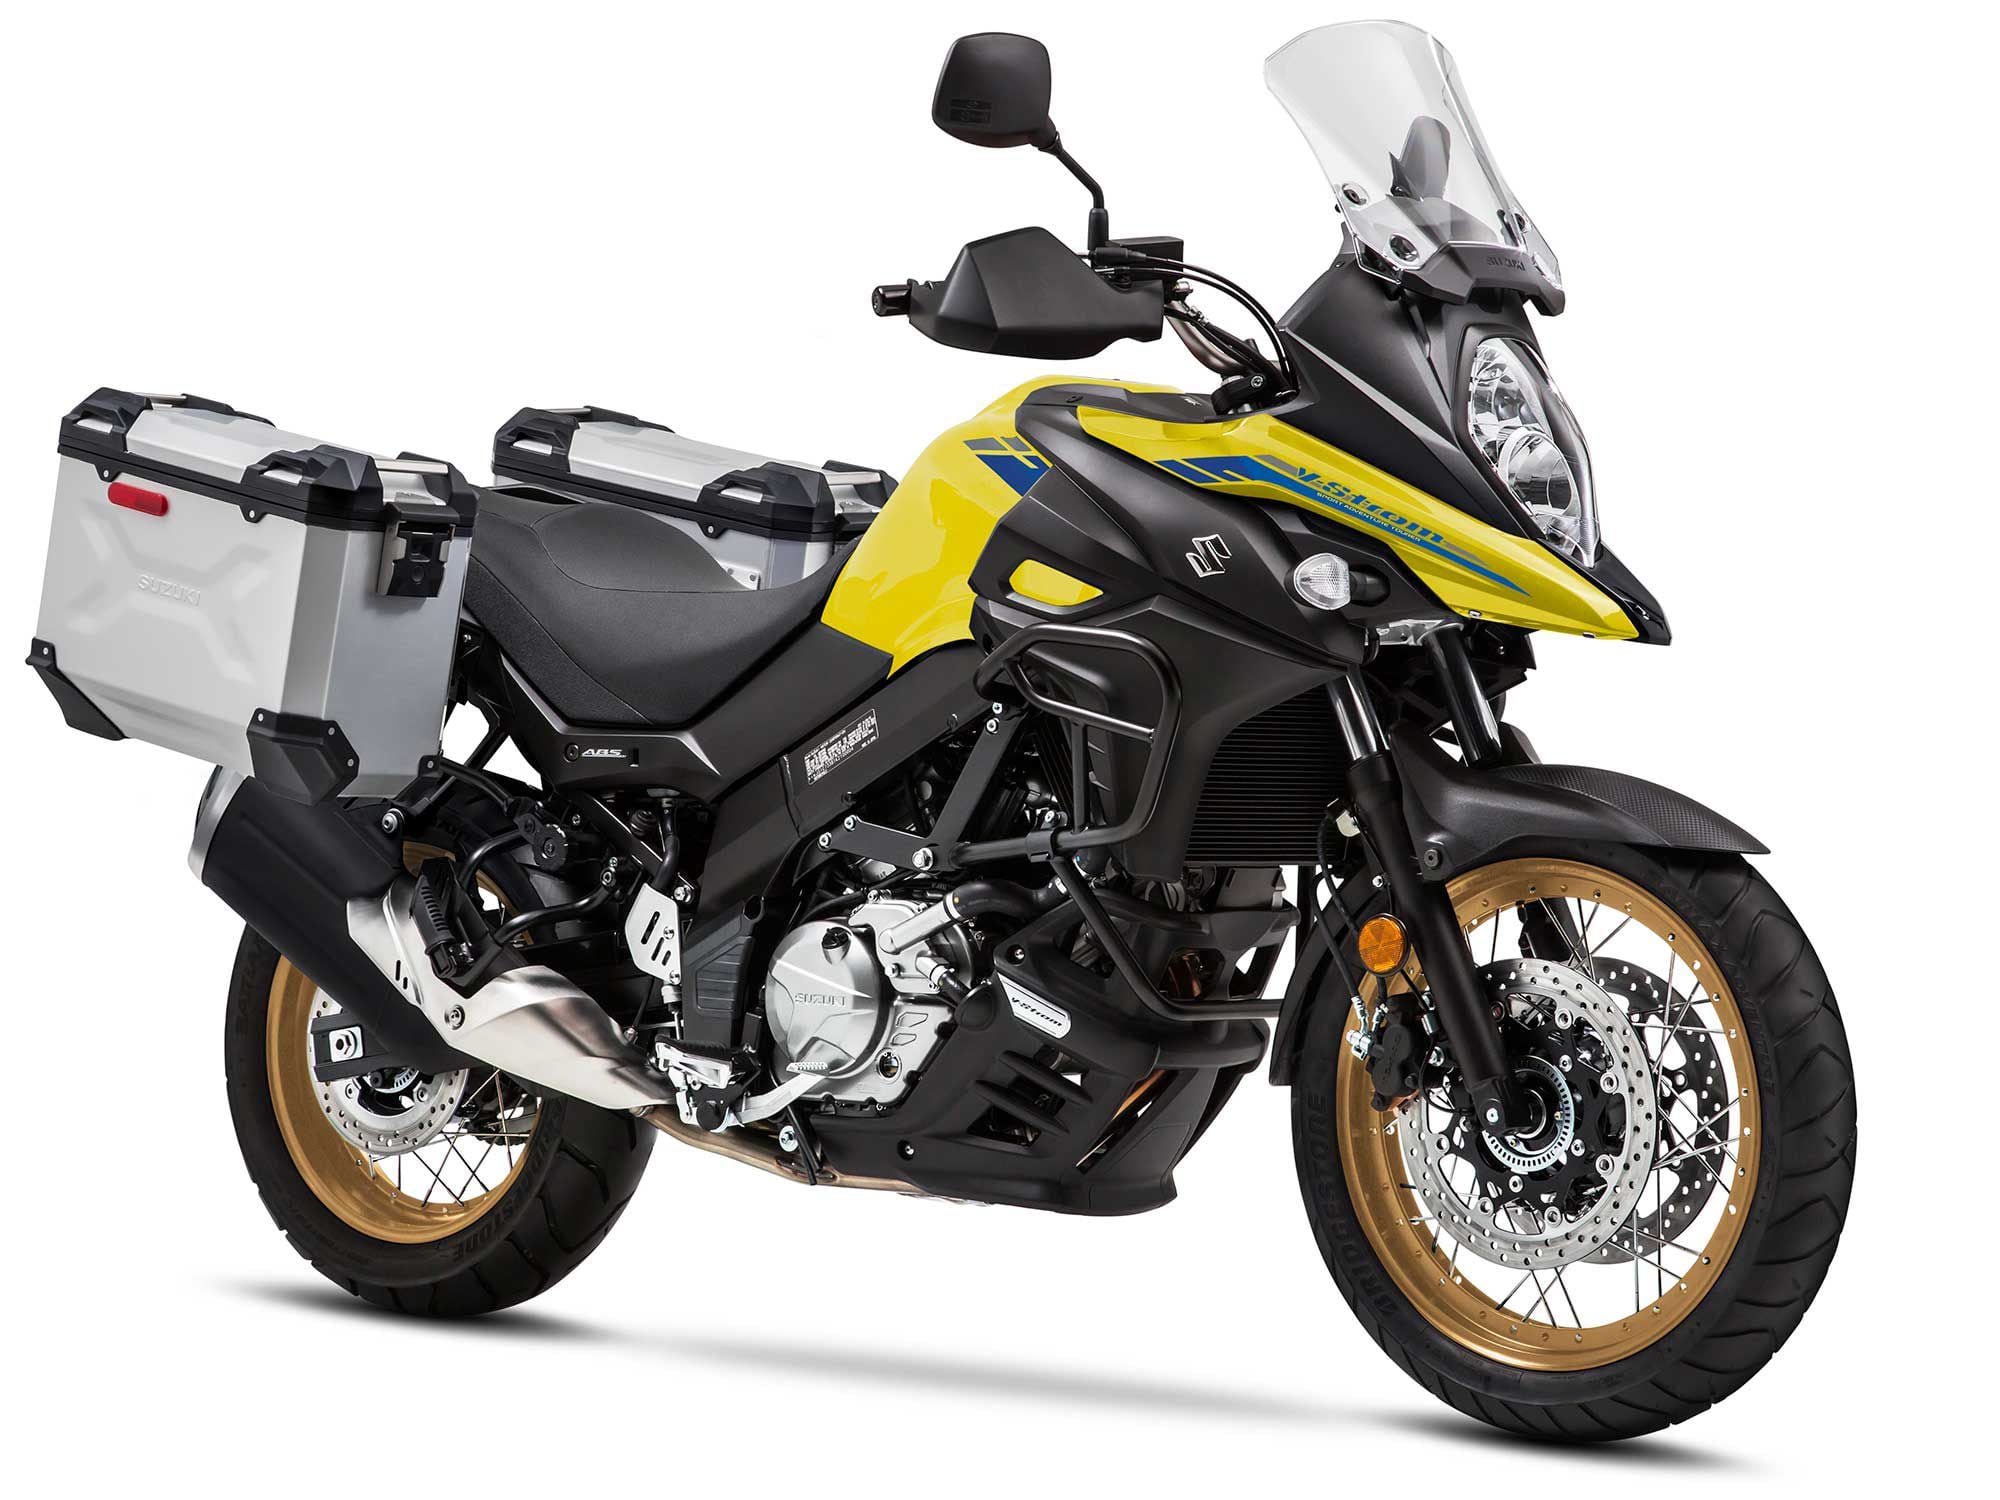 The Wee-Strom returns in 2021 with V-Strom 1050 graphics.